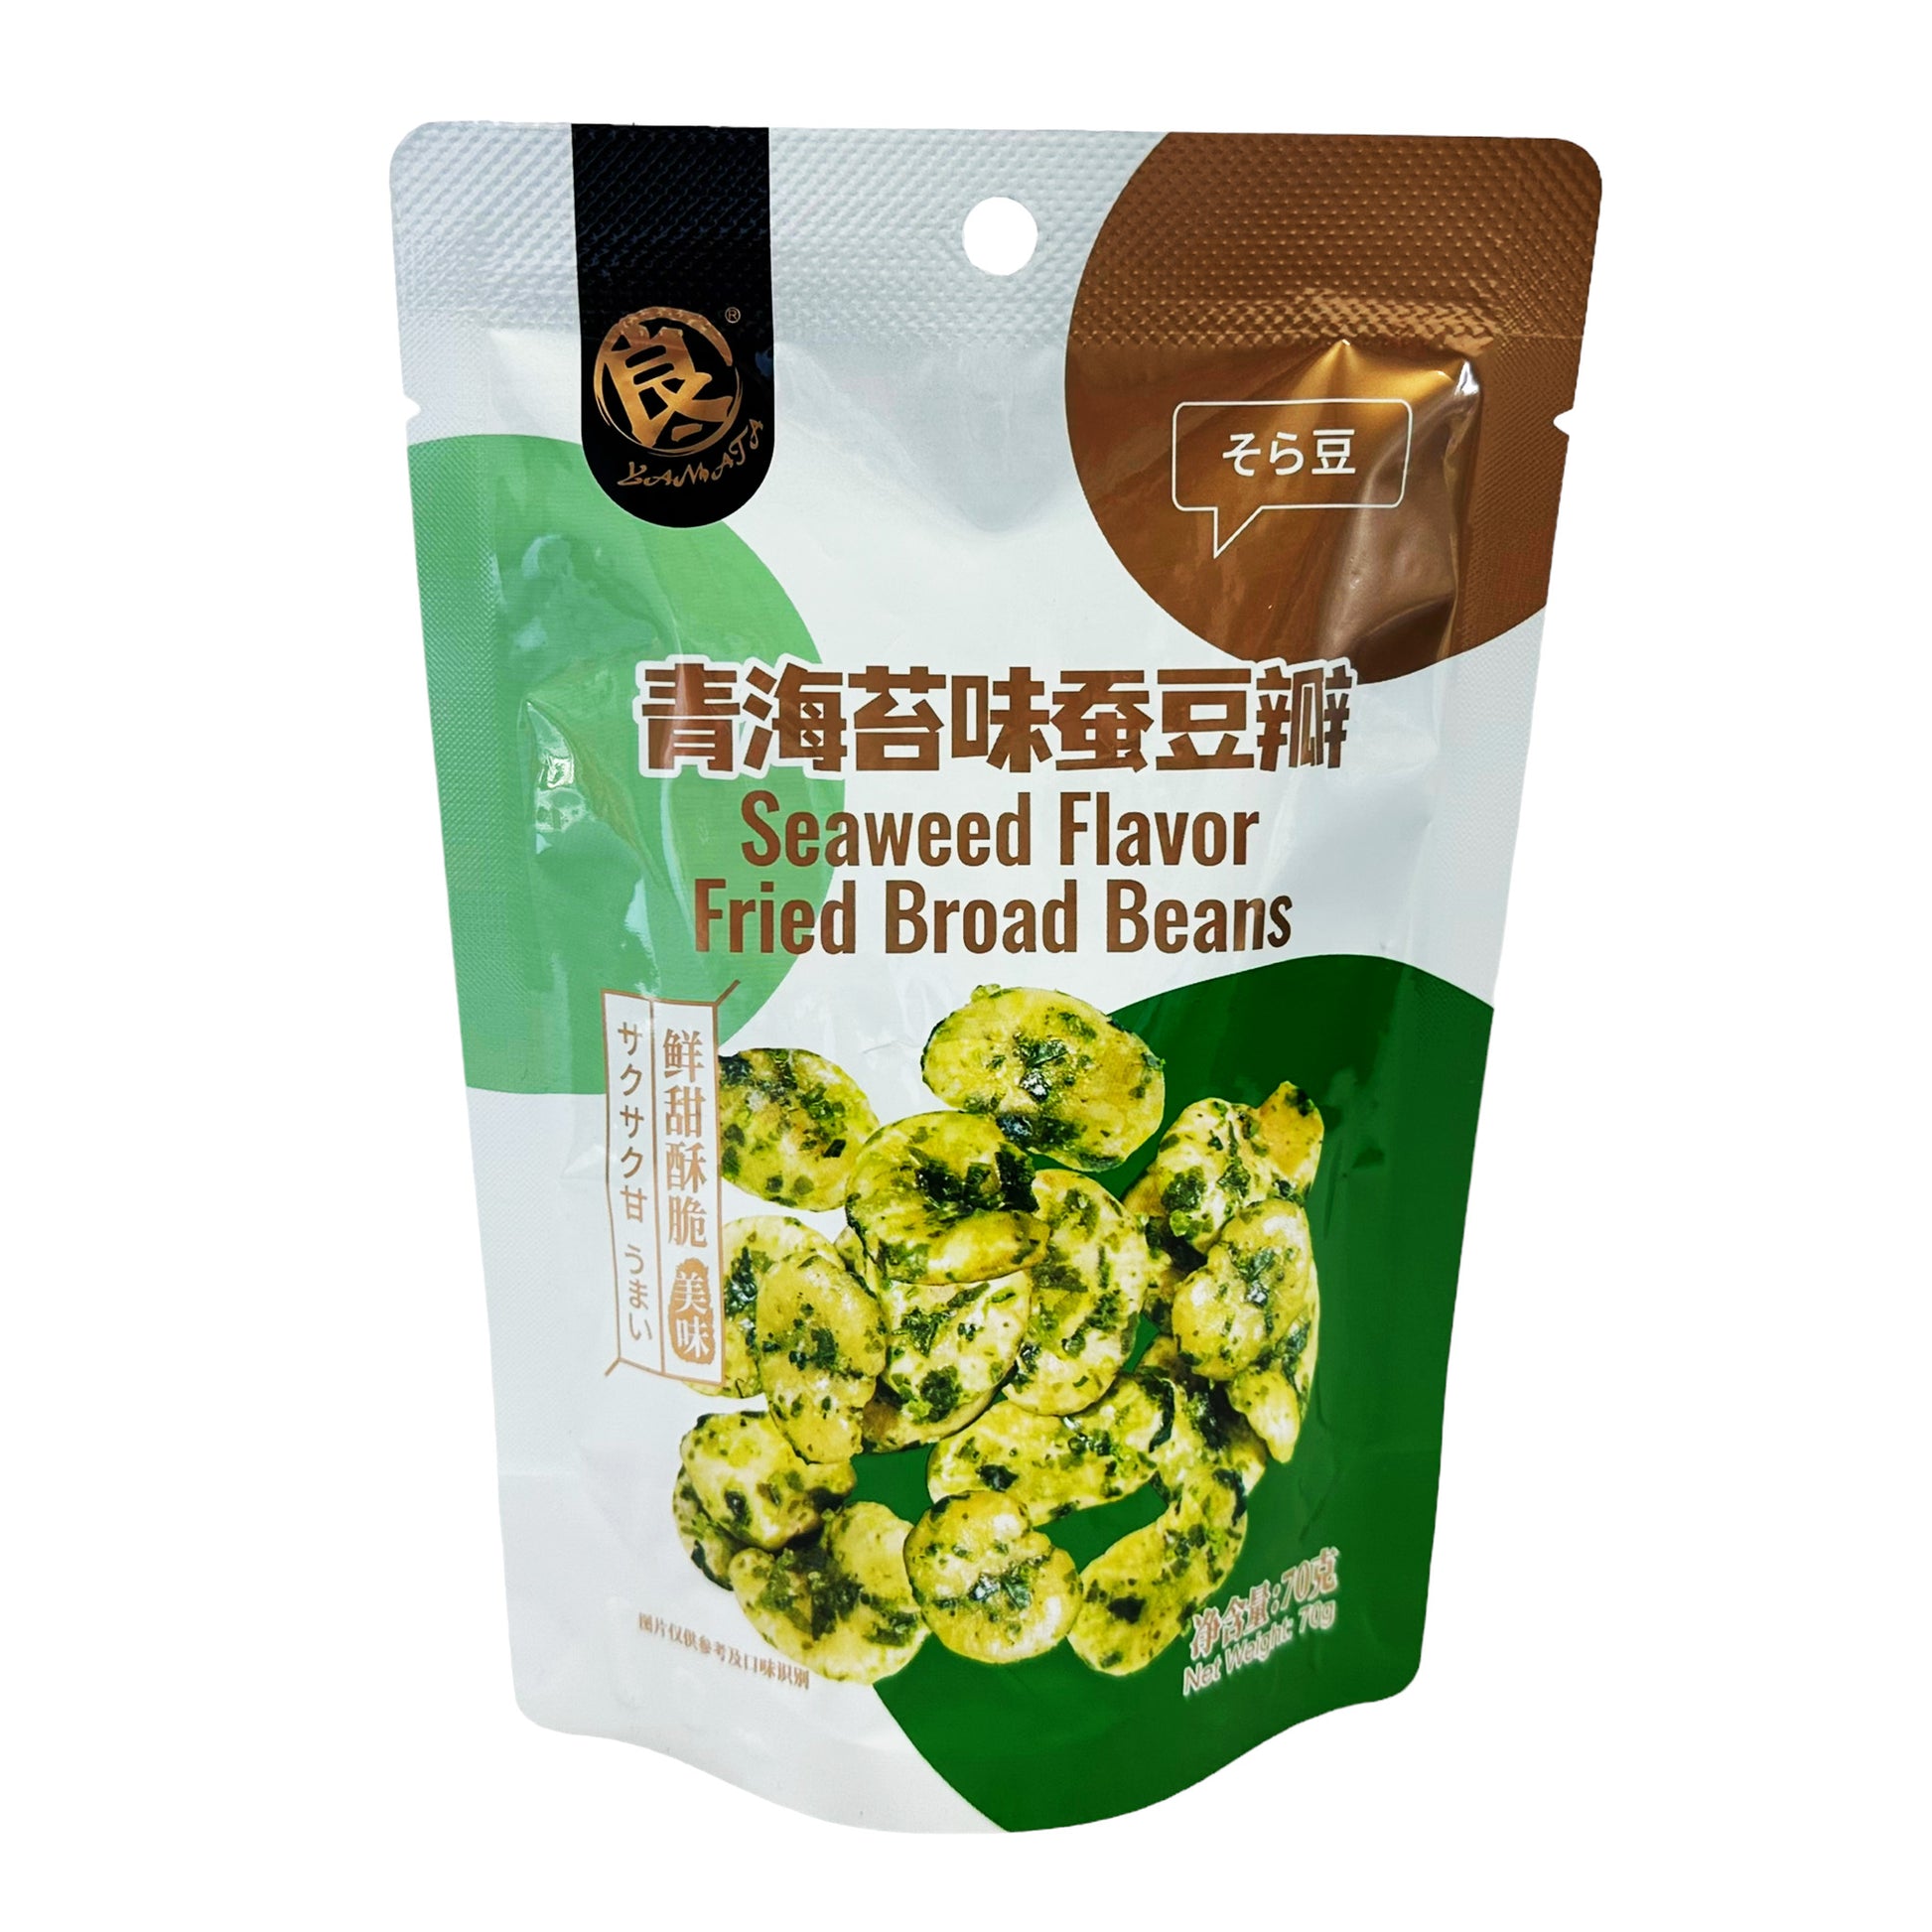 Front graphic image of Yamata Seaweed Flavor Fried Broad Beans 2.46oz (70g)